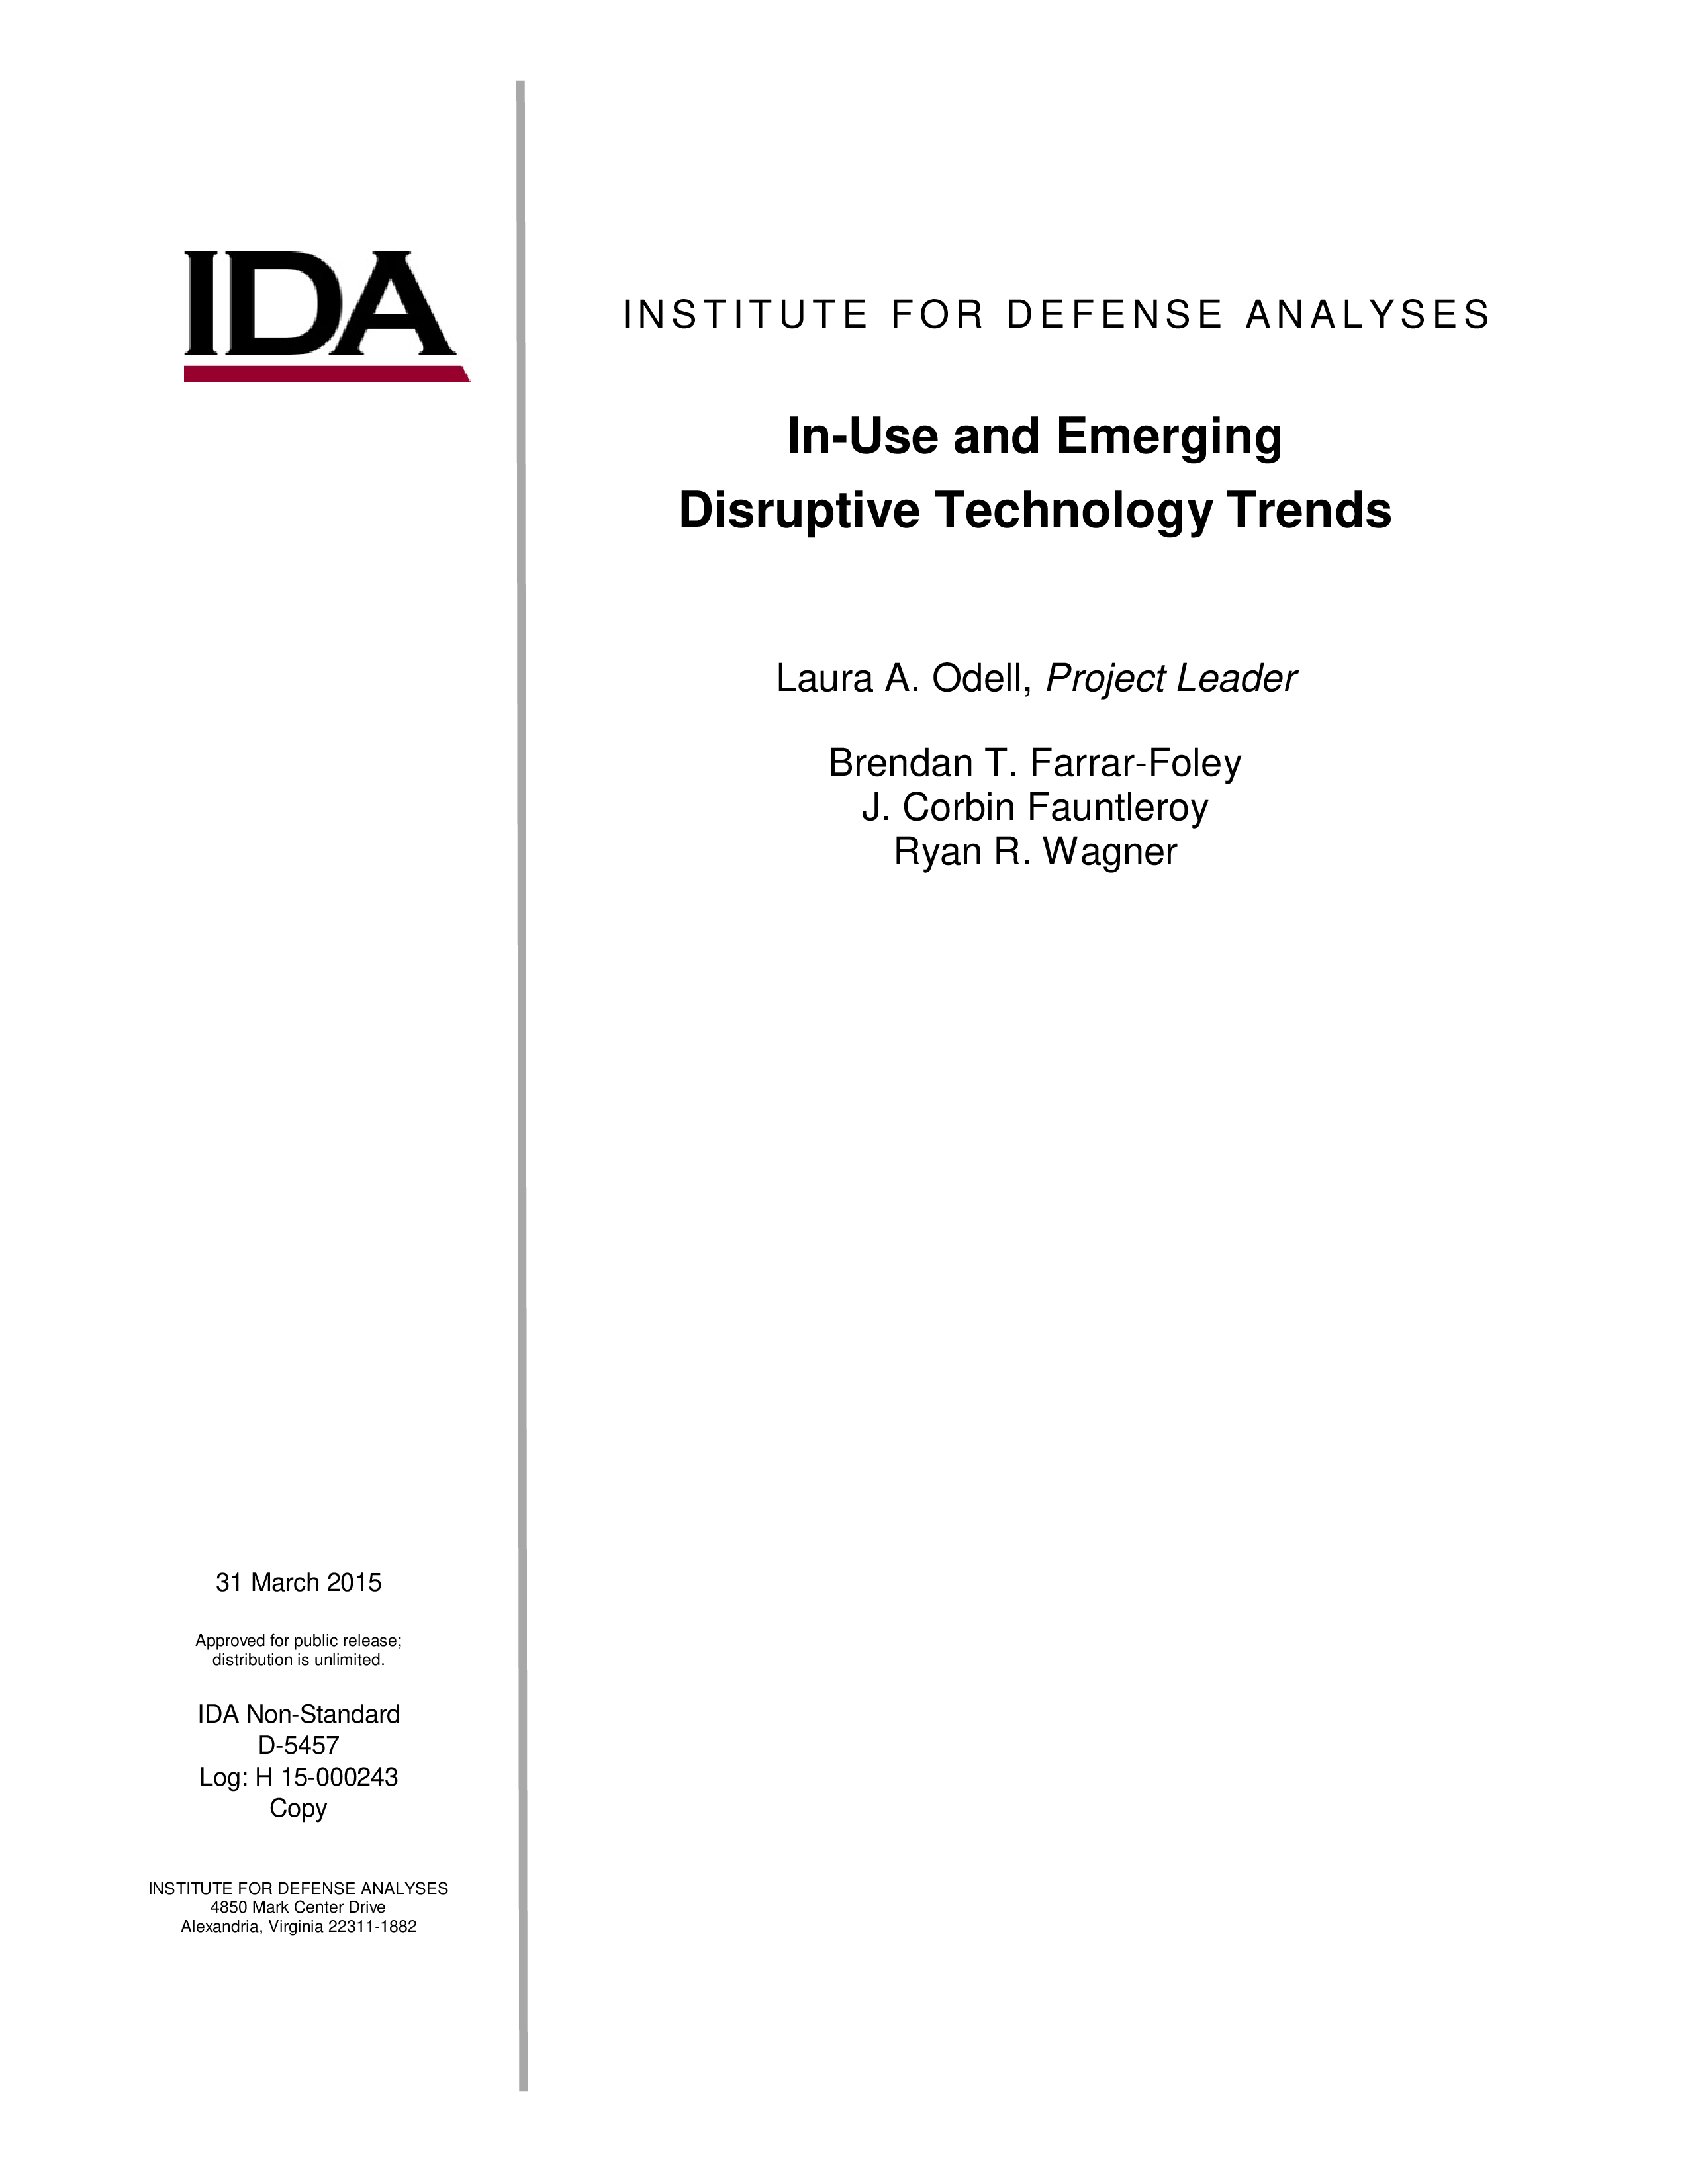 In-Use and Emerging Disruptive Technology Trends